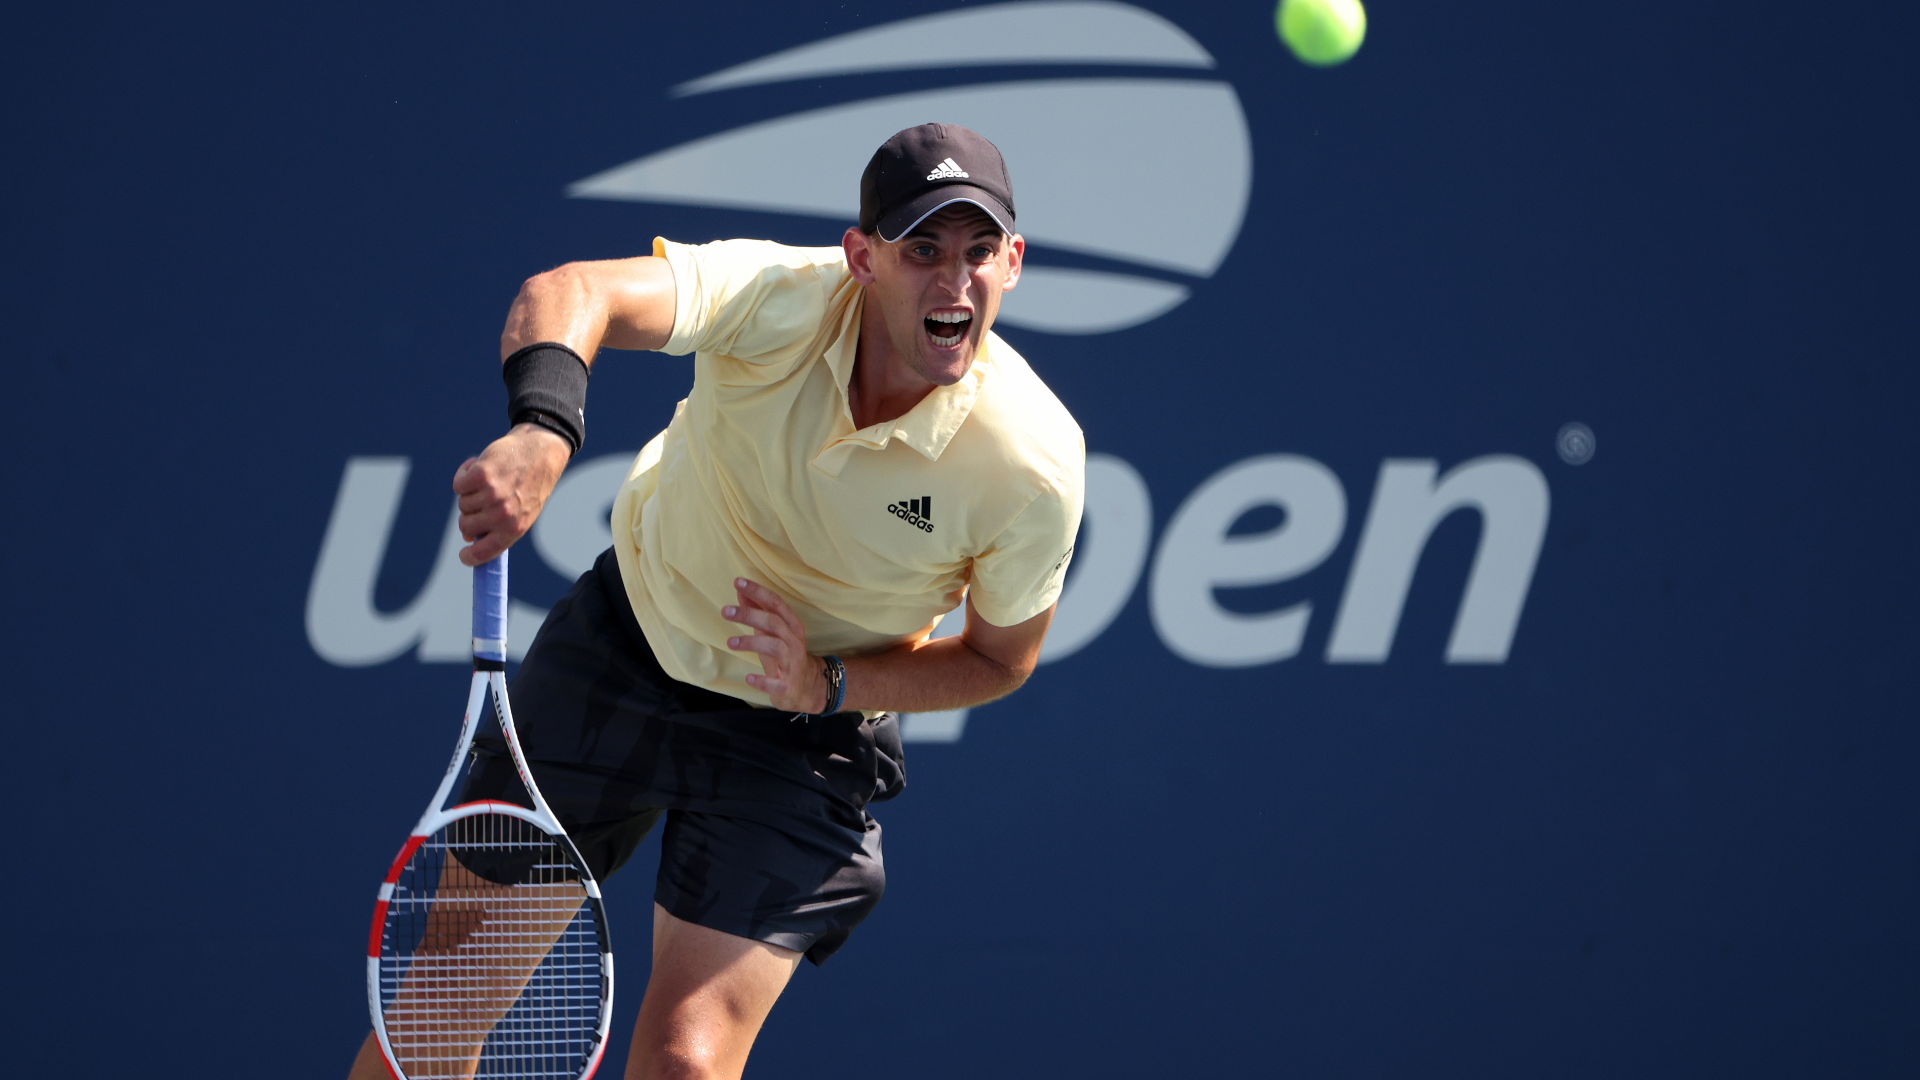 Thiem, the 2020 US Open champion, suffers first-round defeat to Carreno Busta